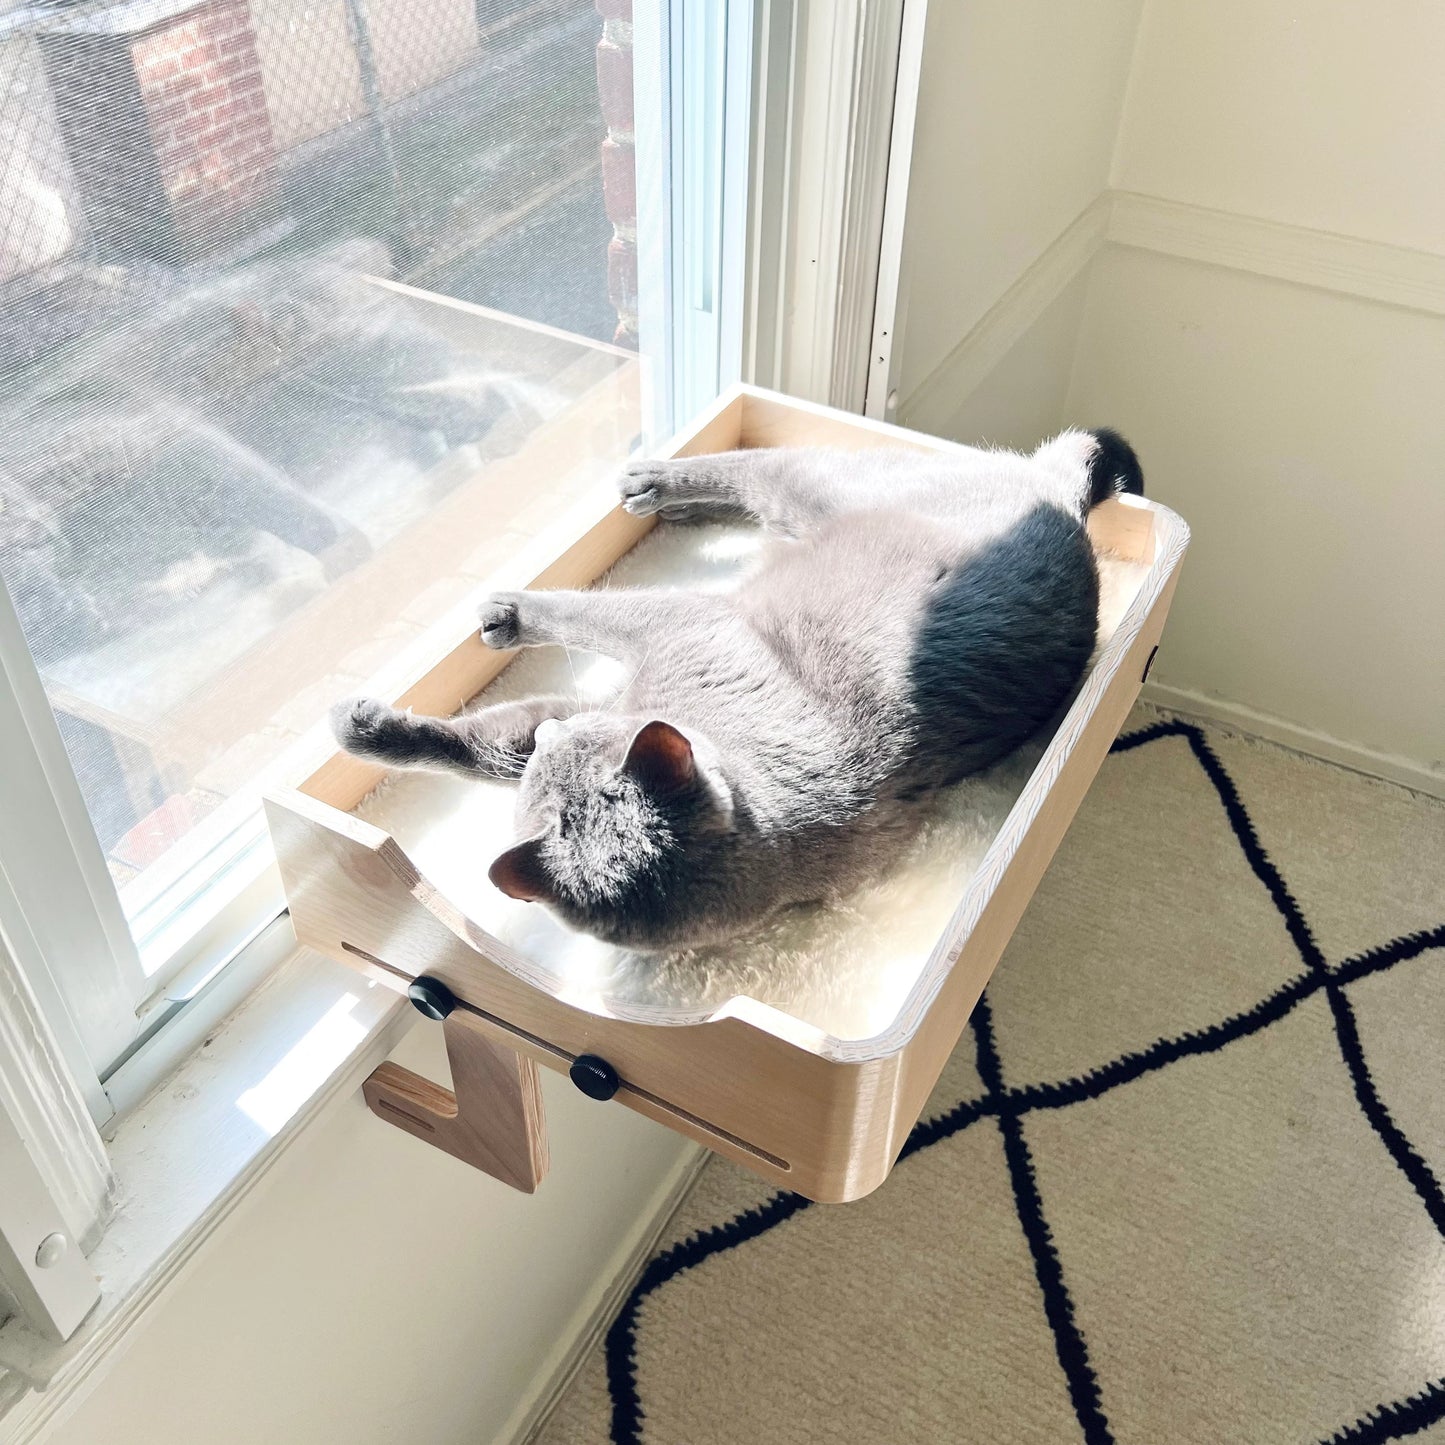 THENAMU Ms, 20" x 14" Wider space & Happier cats! Non-slip, Cat Window Perch, Cat Window Shelf, Cat Window Seat, Installed-removed 1 minute, No tools No nails